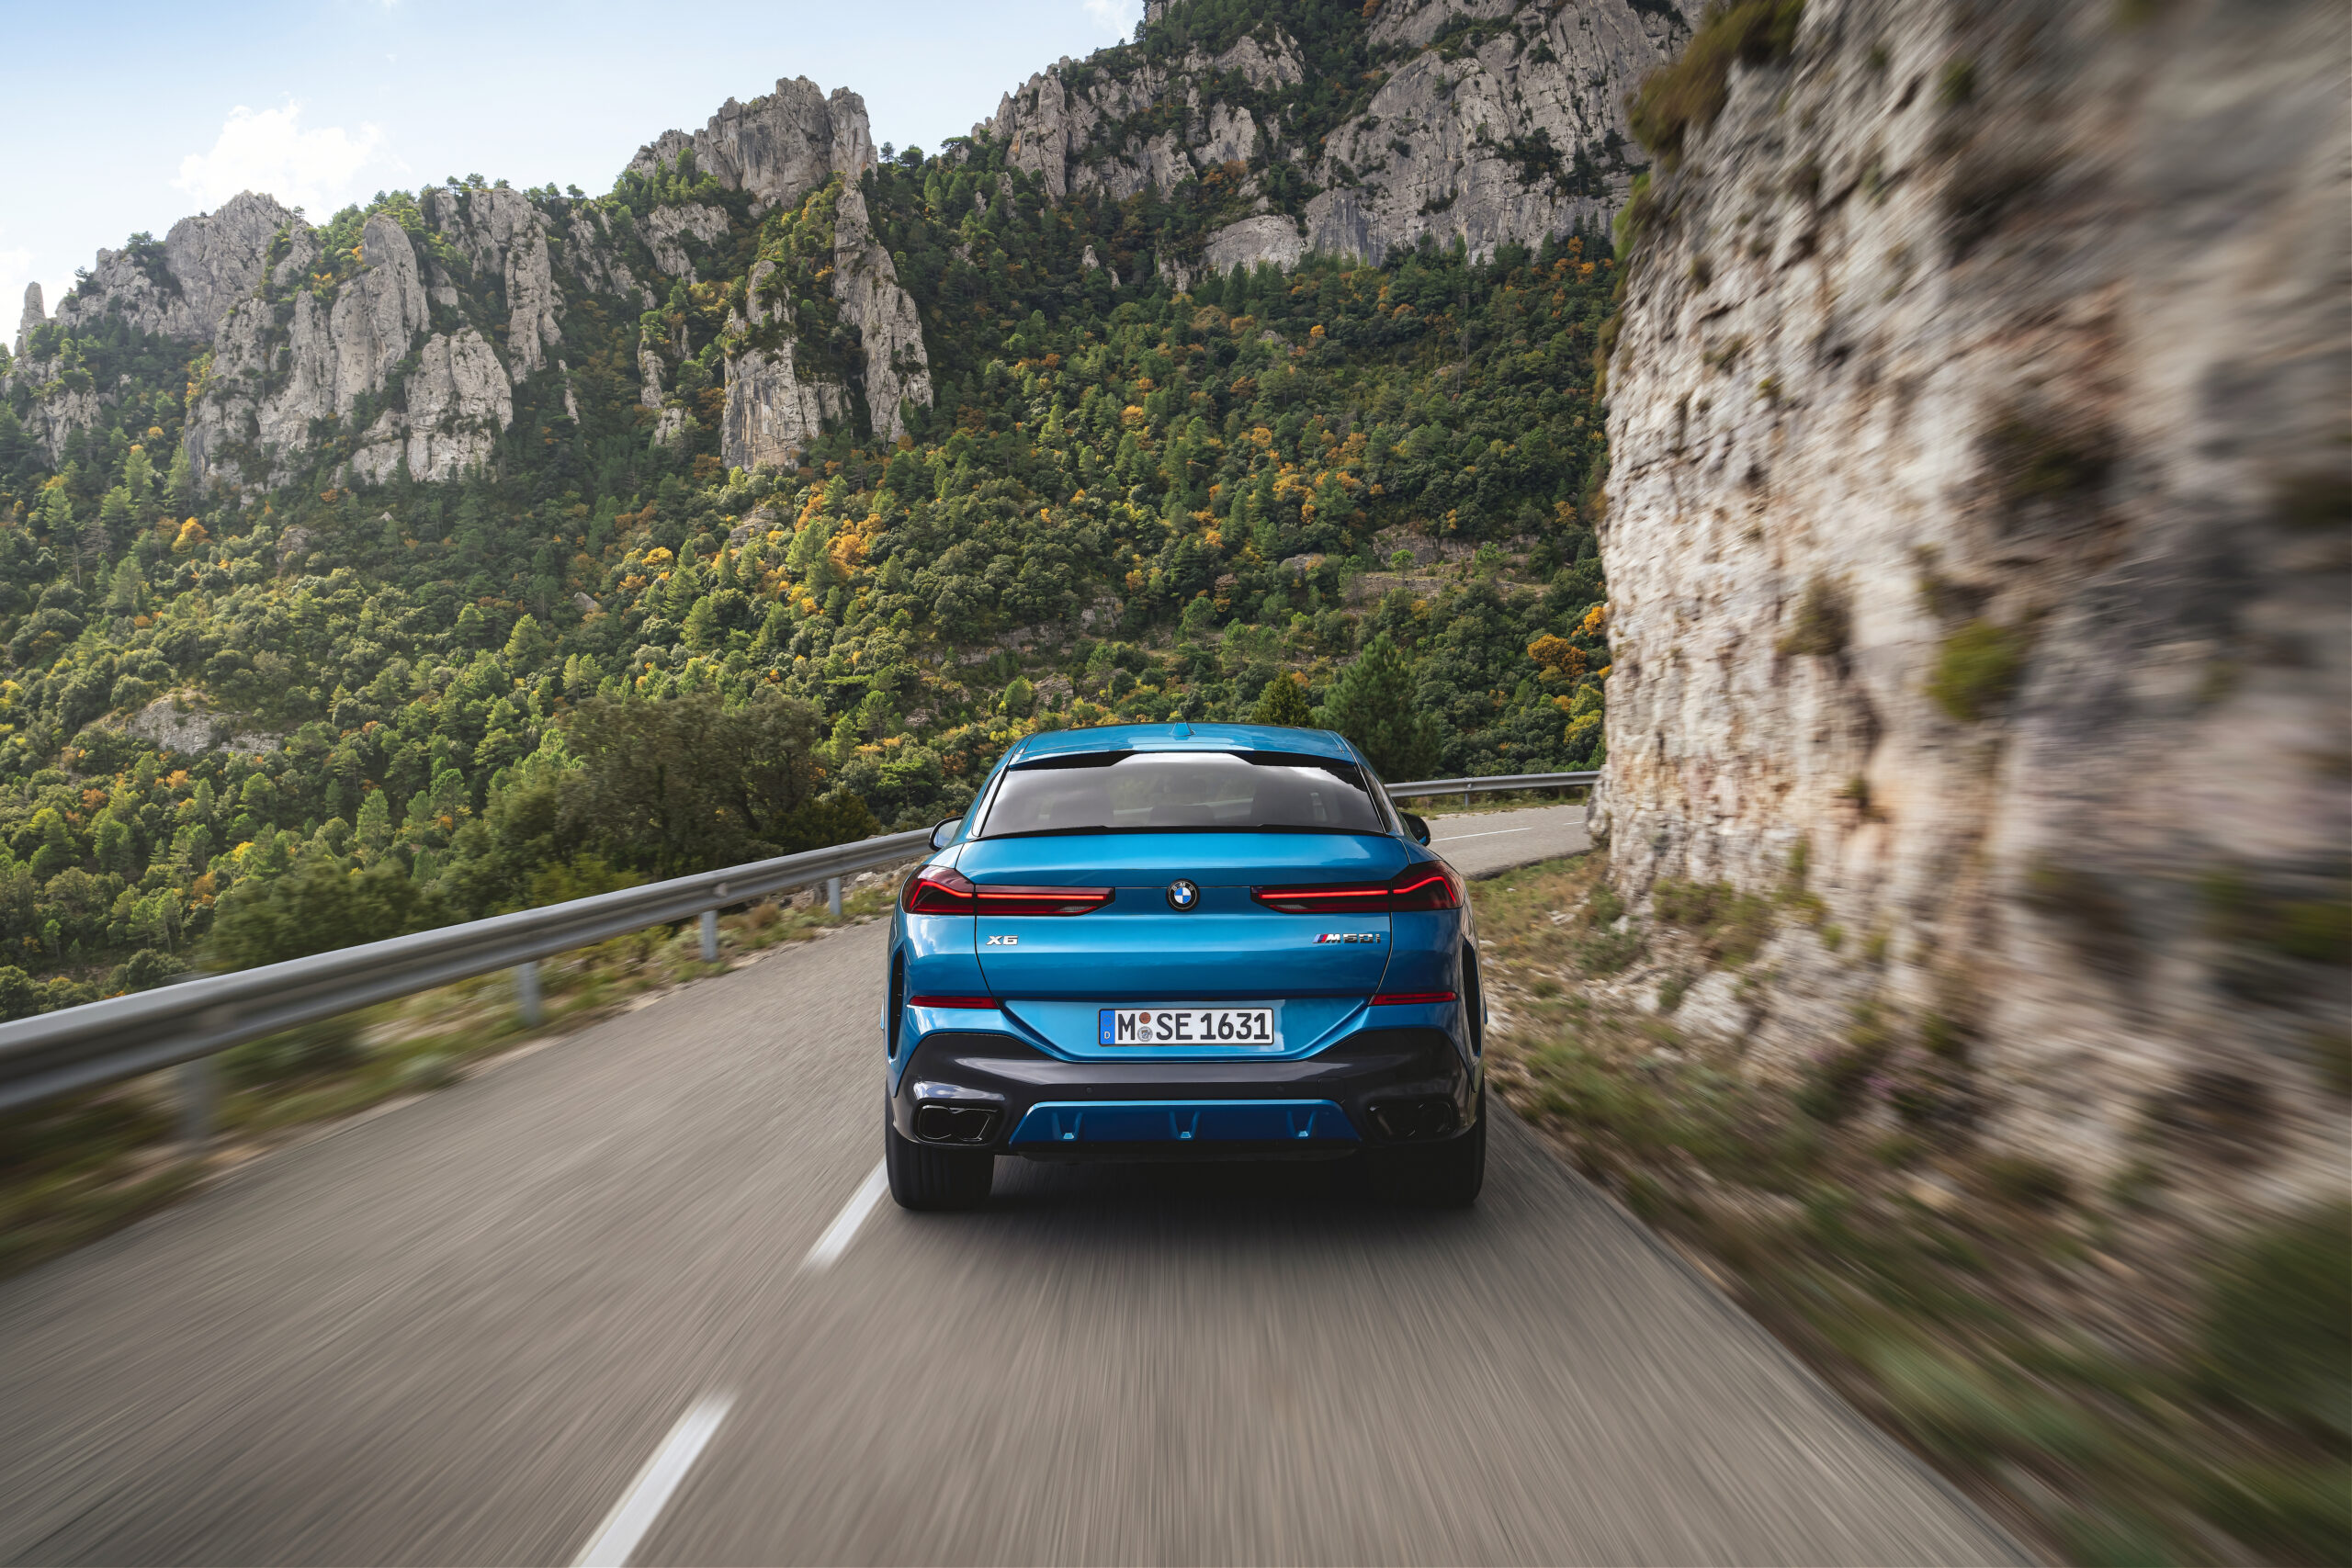 P90492383 highRes the new bmw x6 m60i scaled